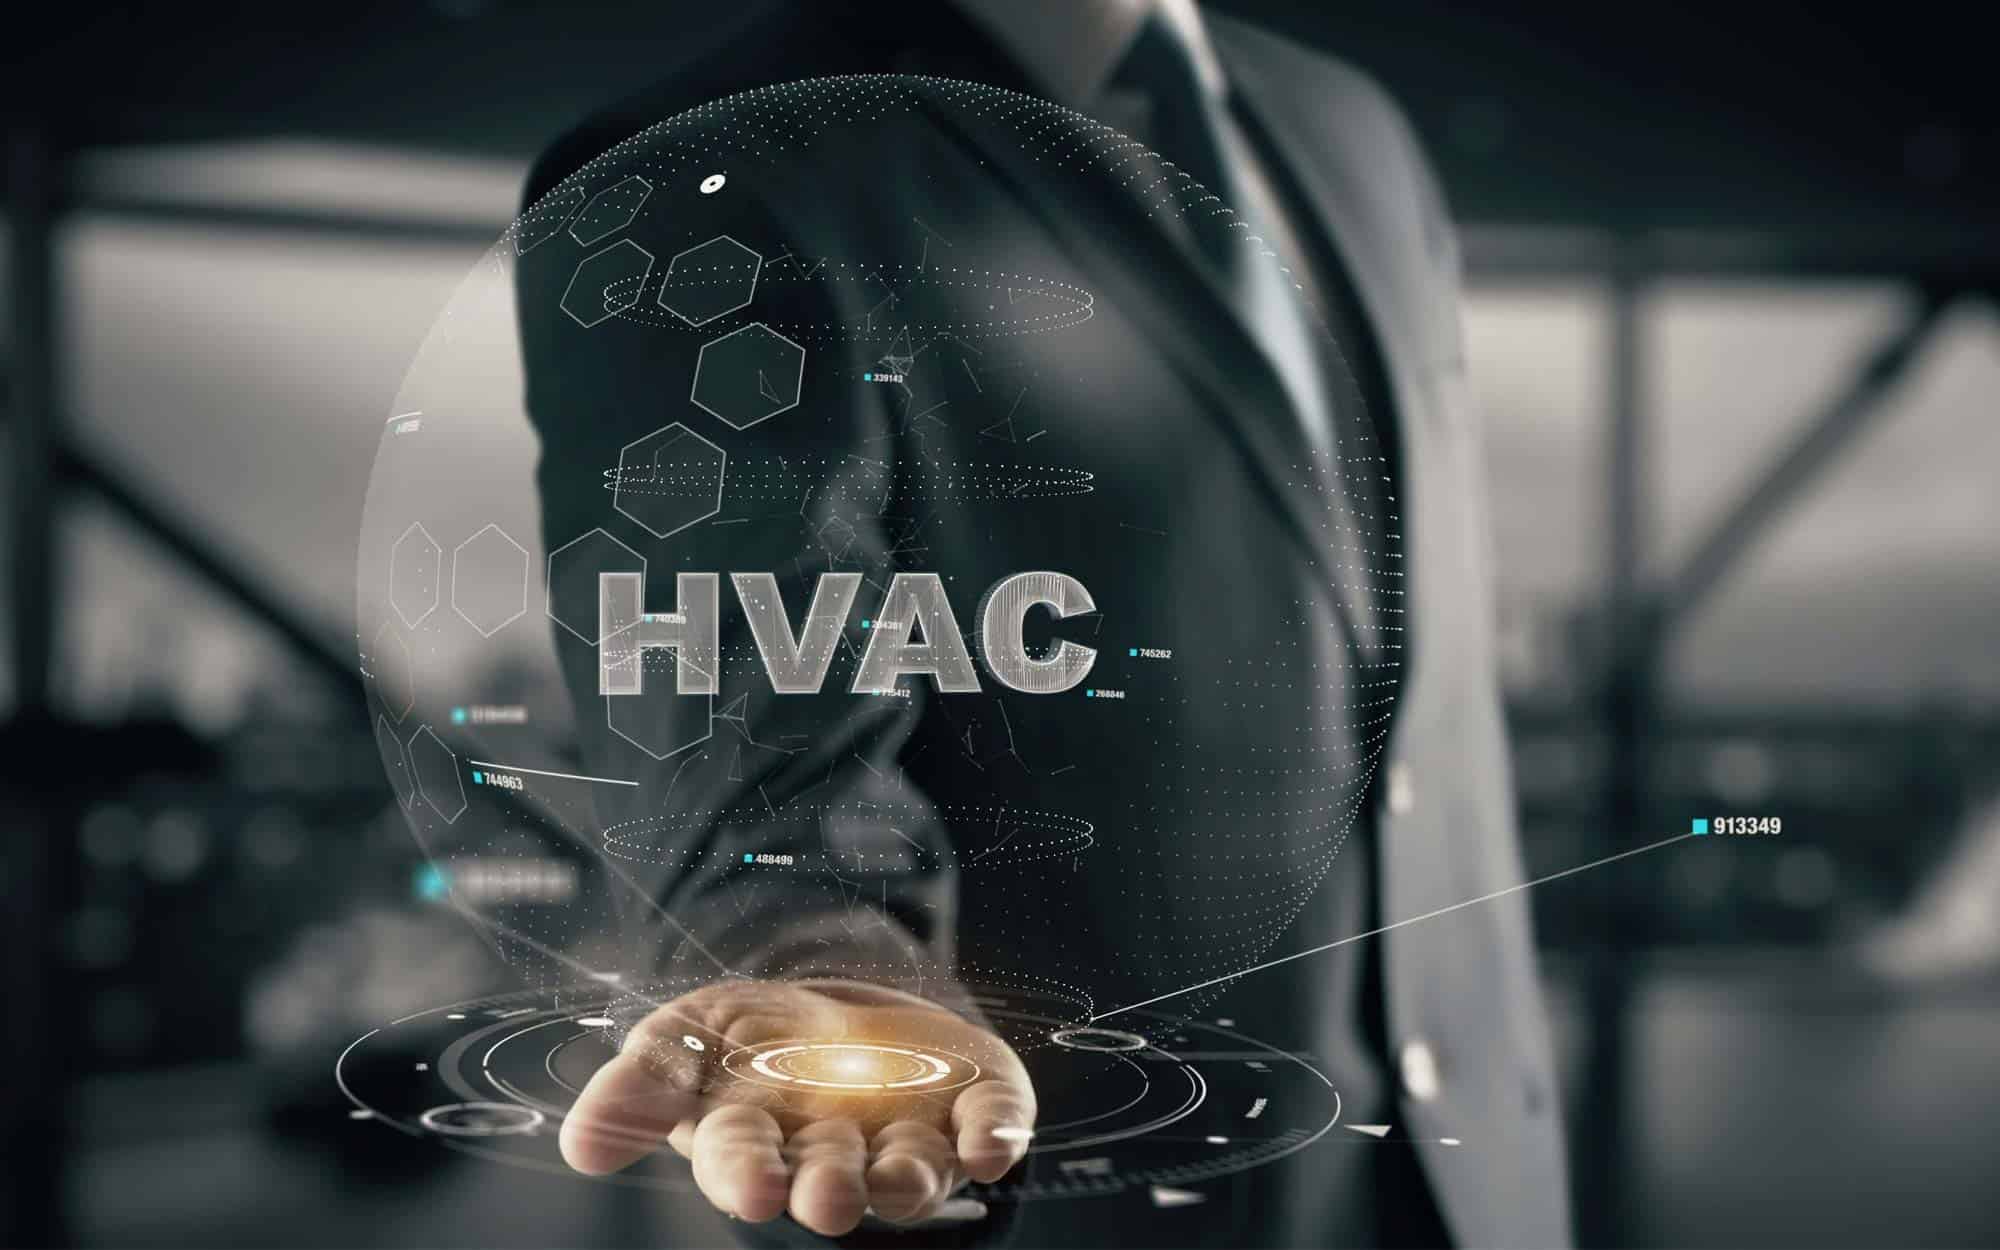 hvac graphic on top of a hand holding it